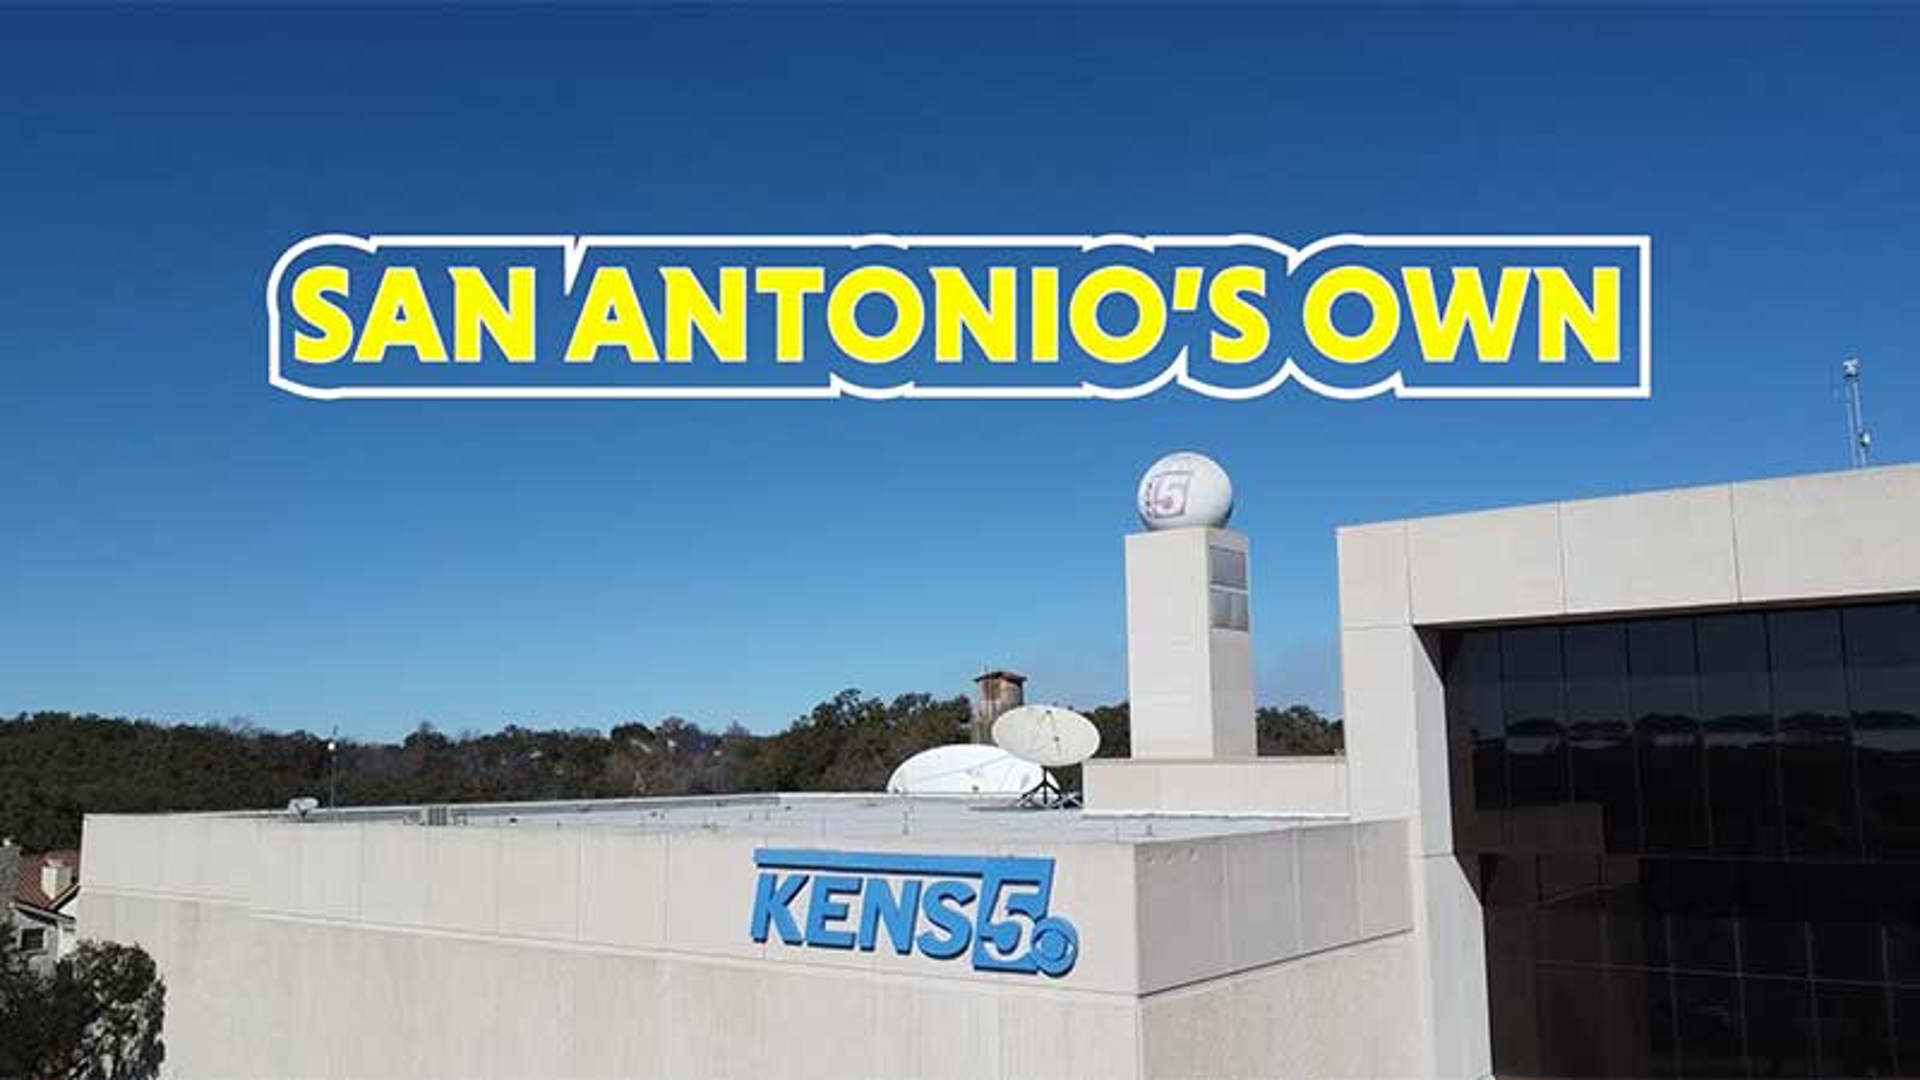 Thank you for watching KENS 5!